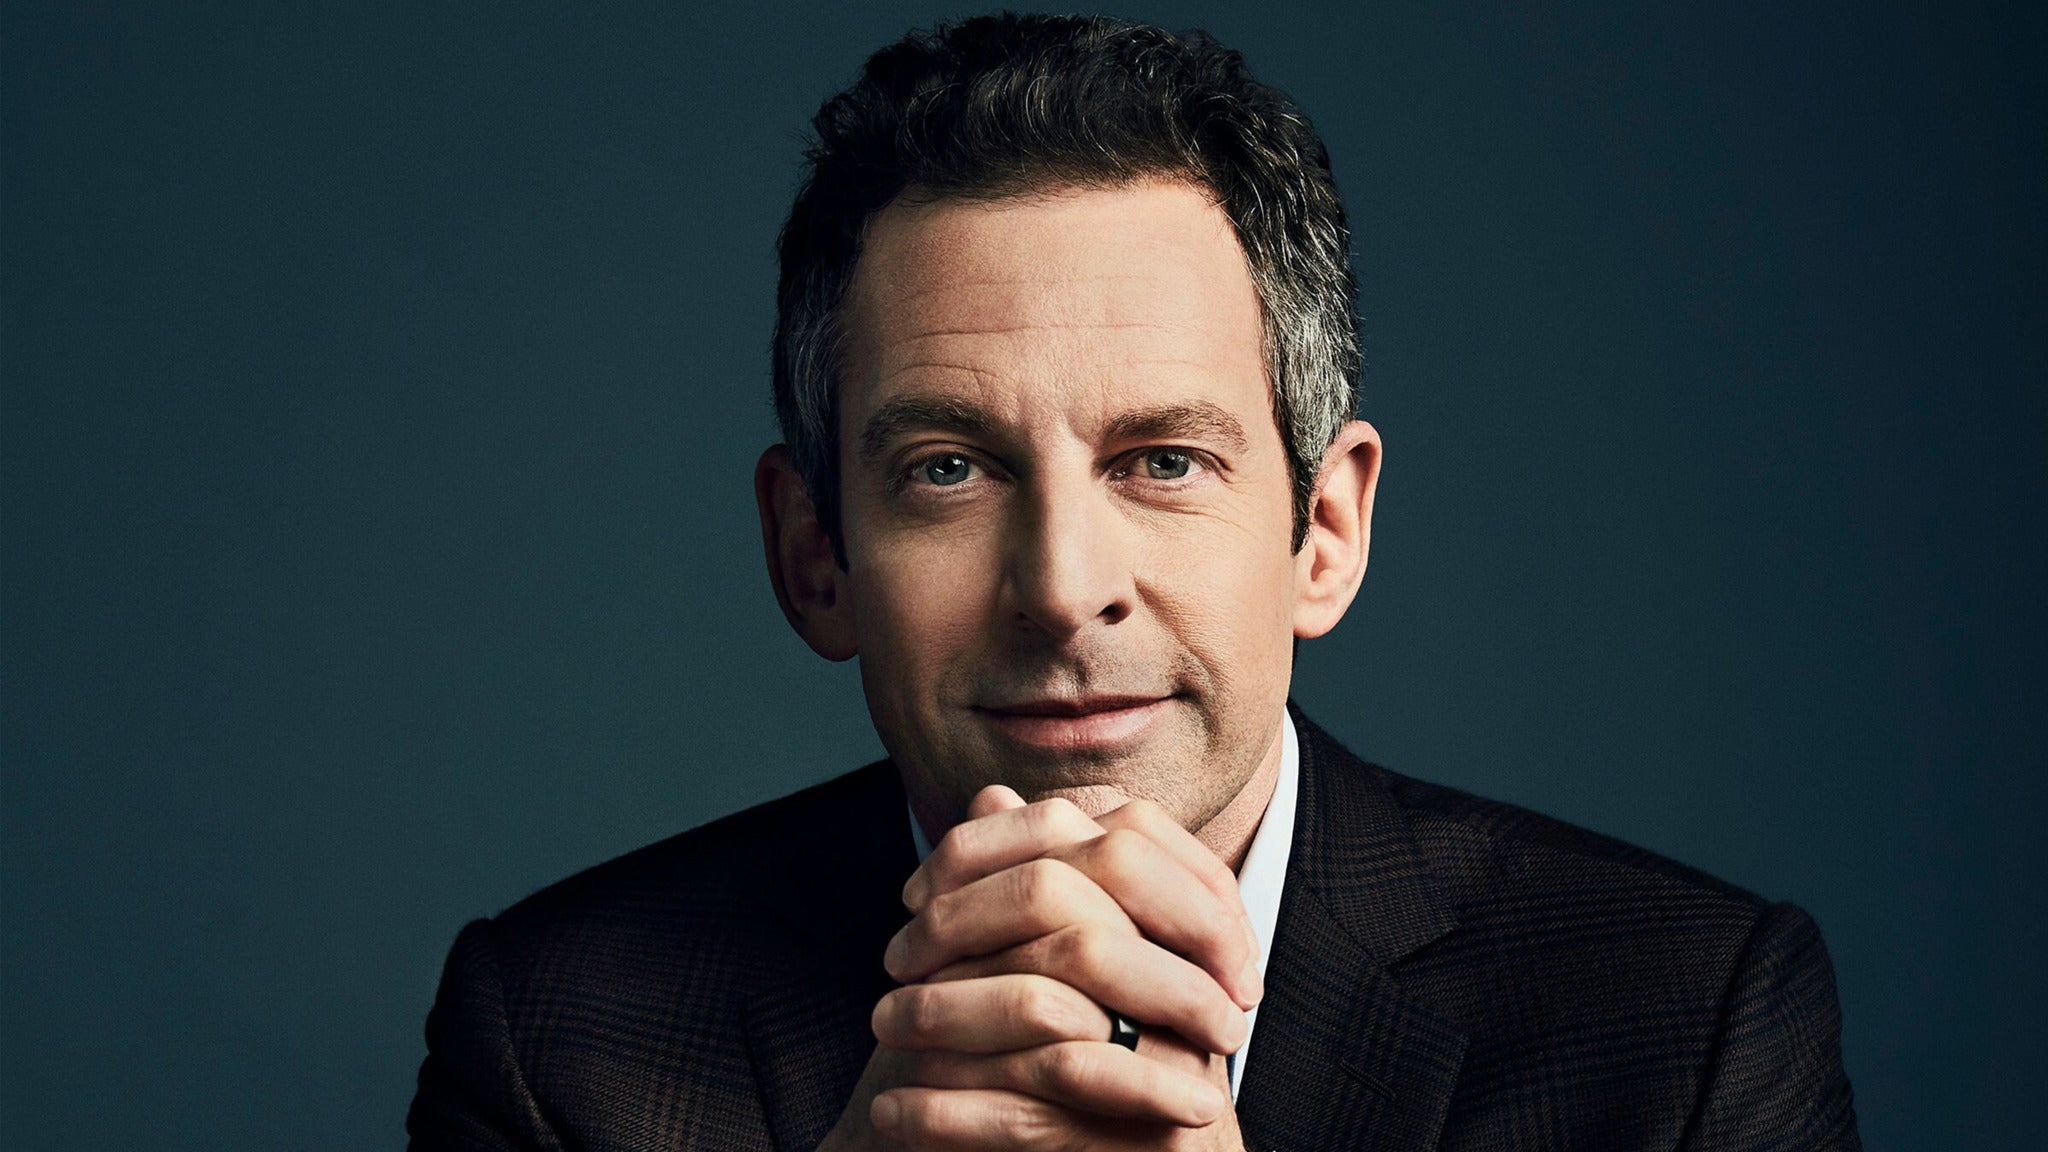 Sam Harris and the Waking Up Podcast in Dallas promo photo for Live Nation presale offer code